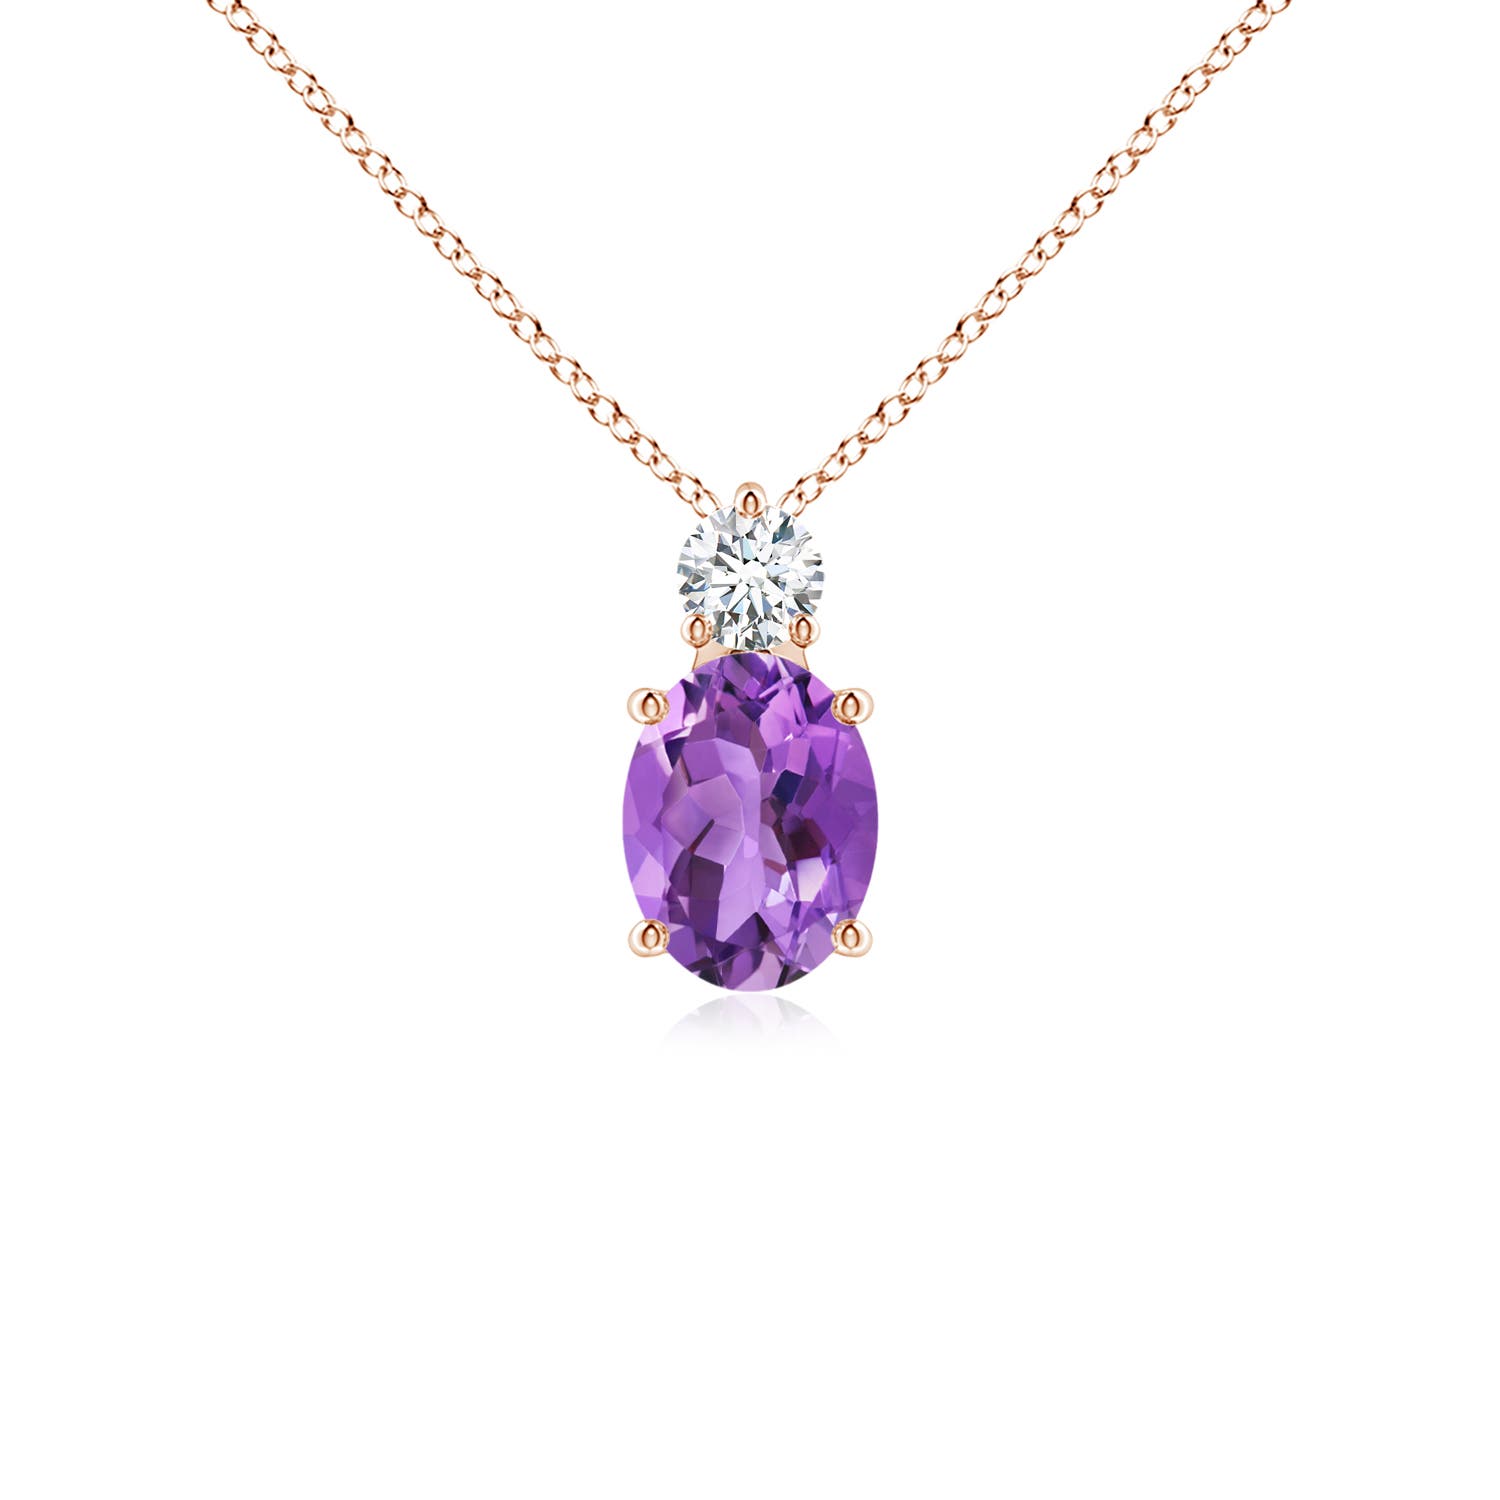 AA - Amethyst / 1.31 CT / 14 KT Rose Gold